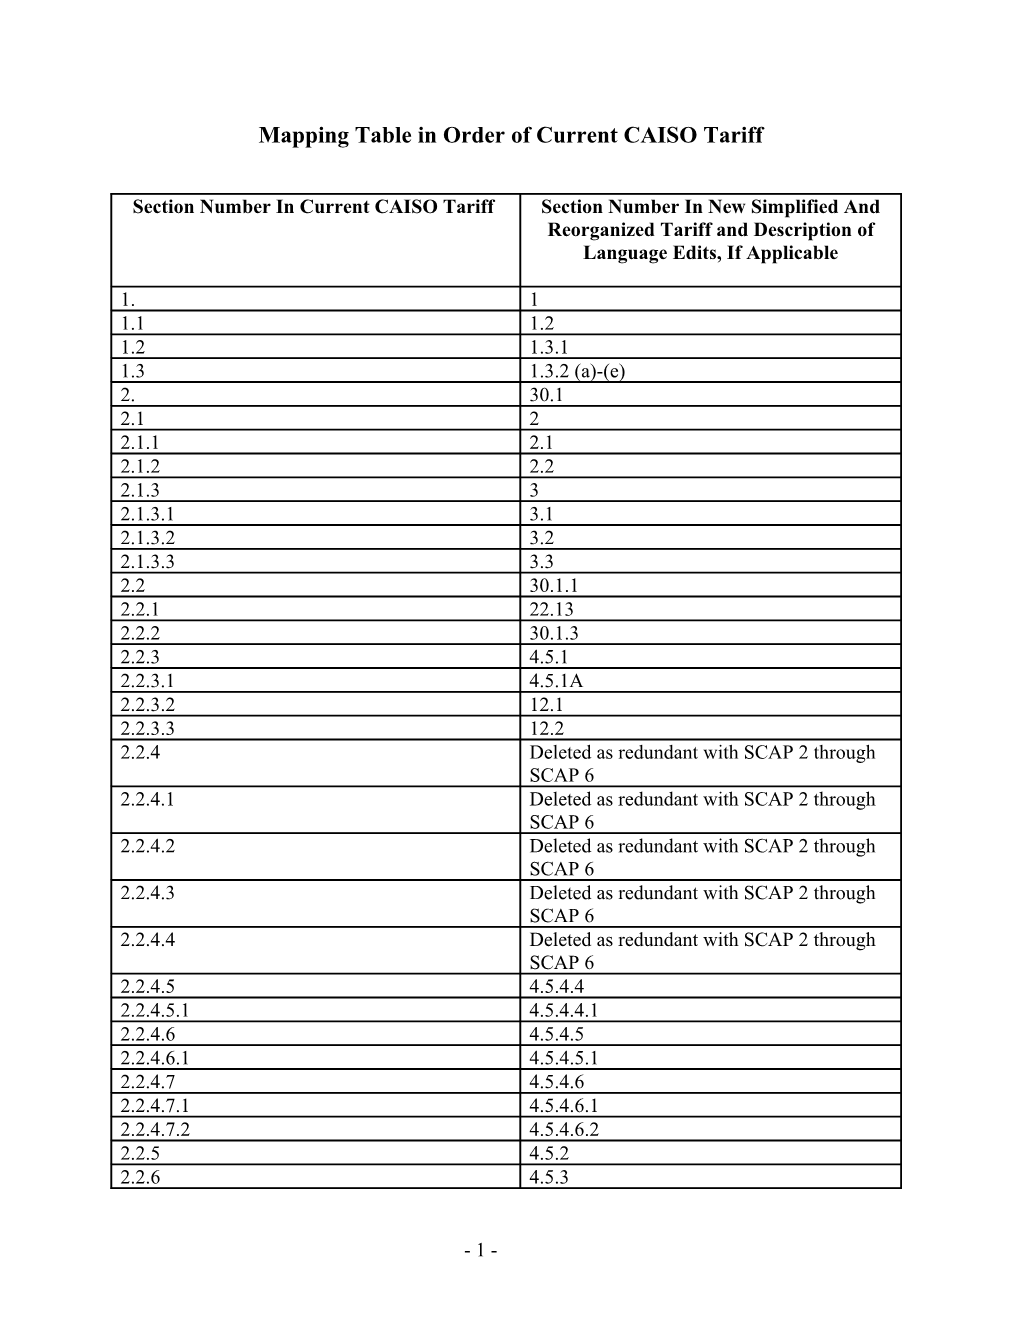 Mapping Table in Order of Current CAISO Tariff for September 22, 2005 S&R